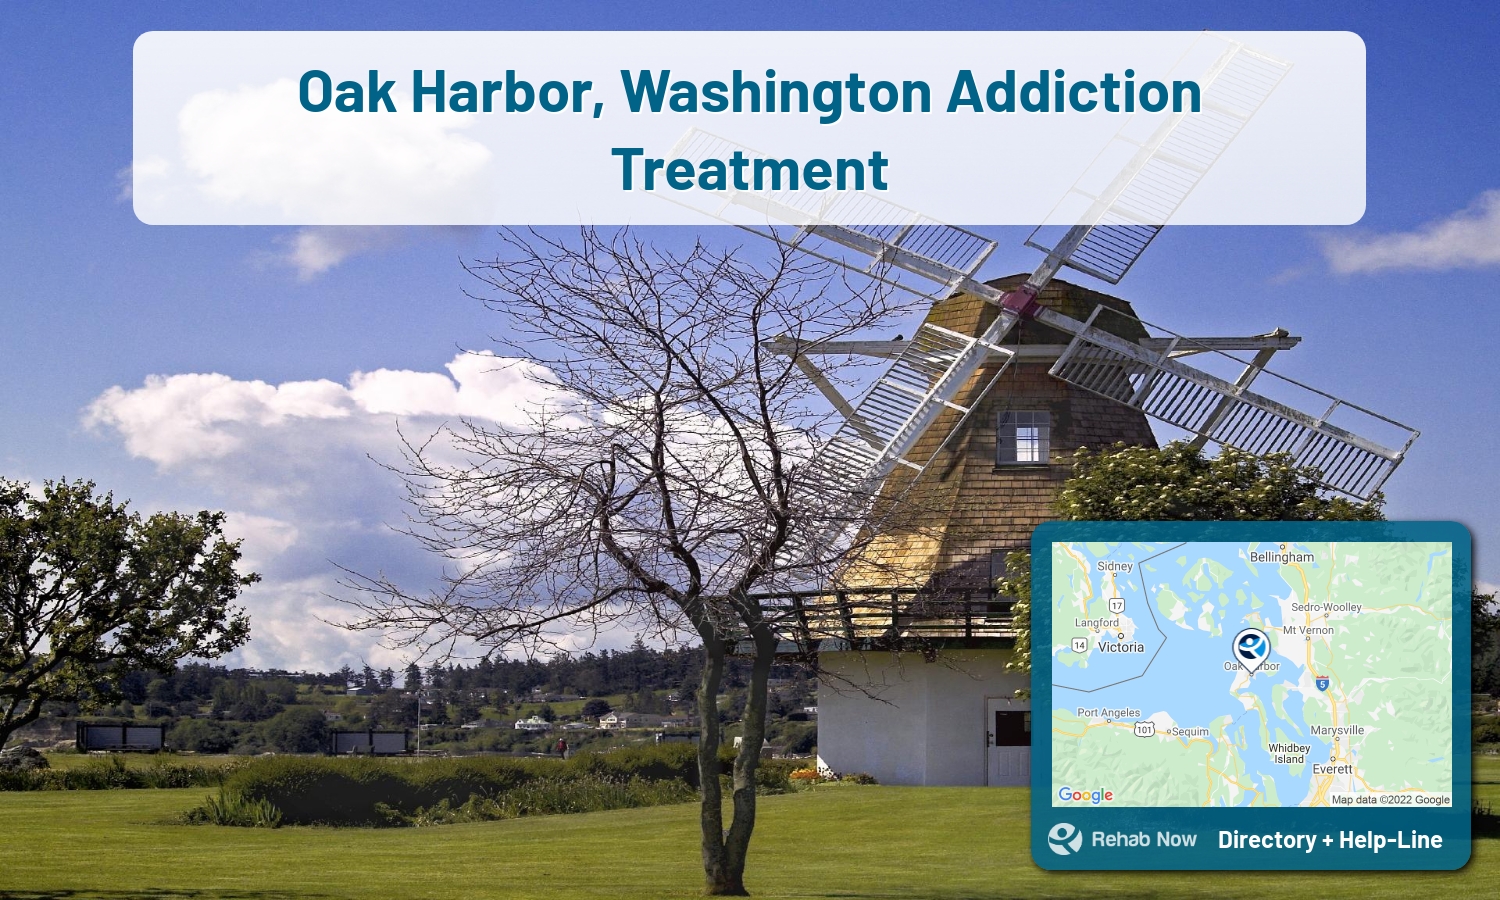 View options, availability, treatment methods, and more, for drug rehab and alcohol treatment in Oak Harbor, Washington